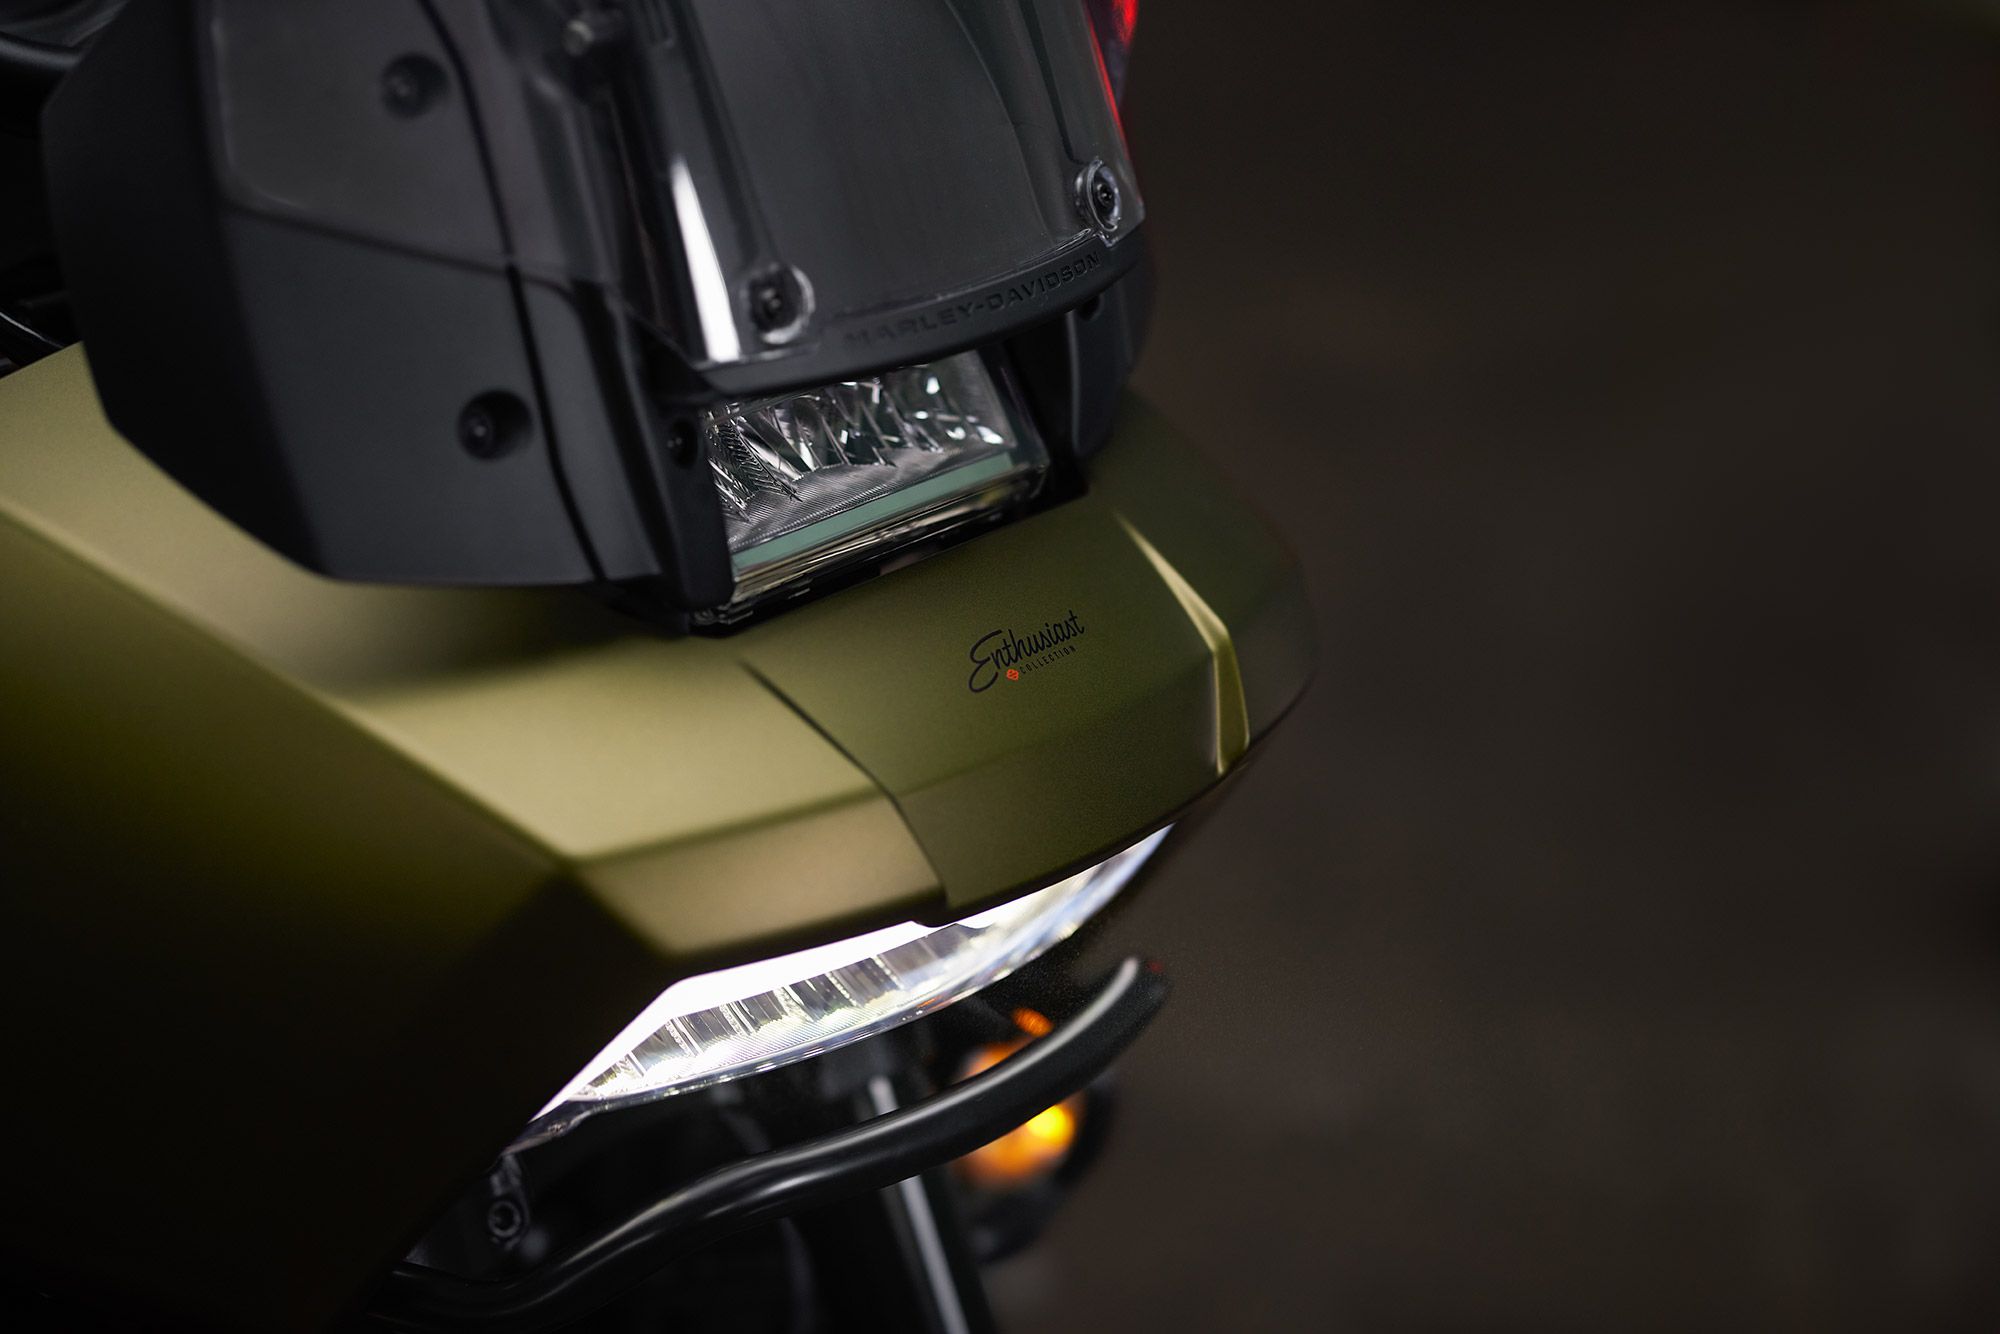 An Enthusiast Collection logo is situated above the Daymaker adaptive headlight.